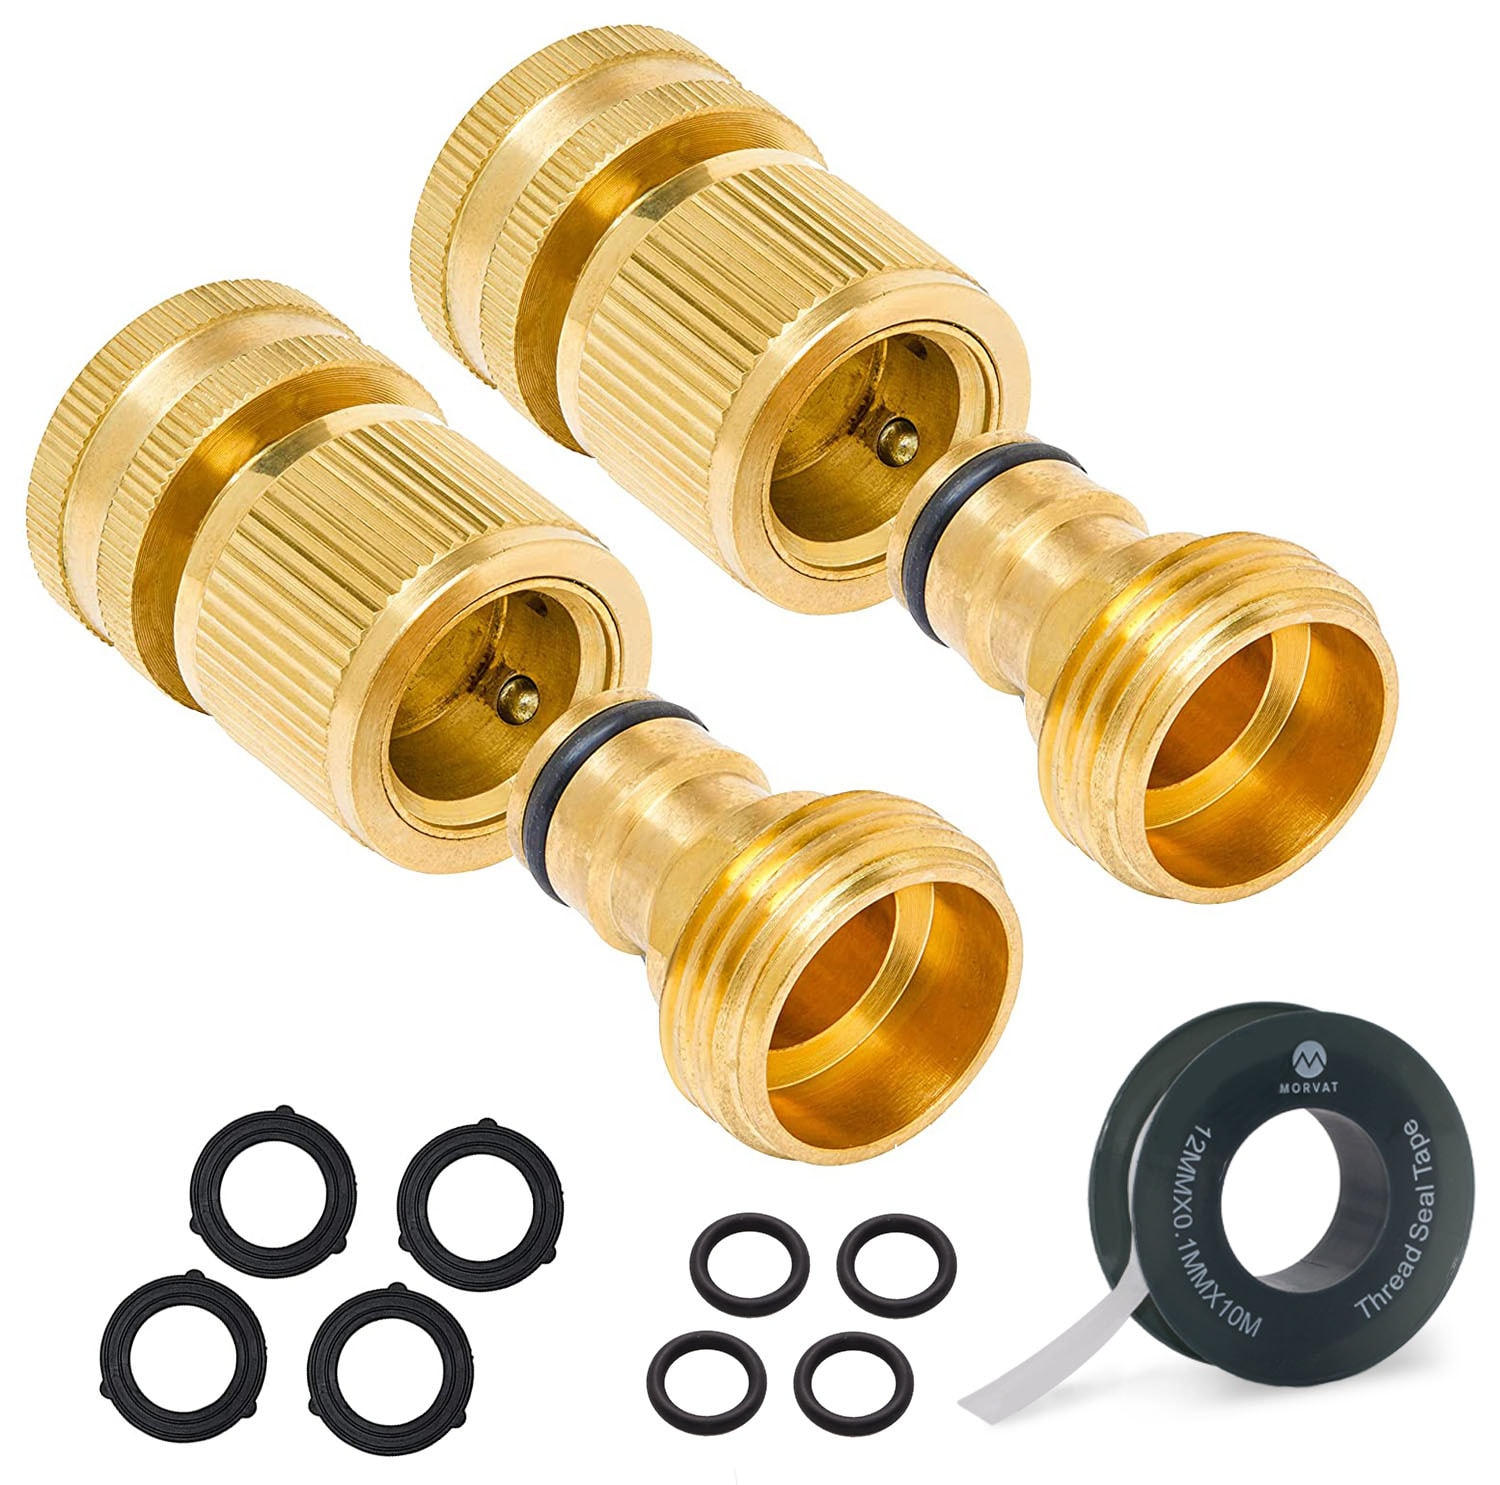 4 Pairs Universal Garden Hose Quick Connect Set Brass Hose Tap Adapter Connector